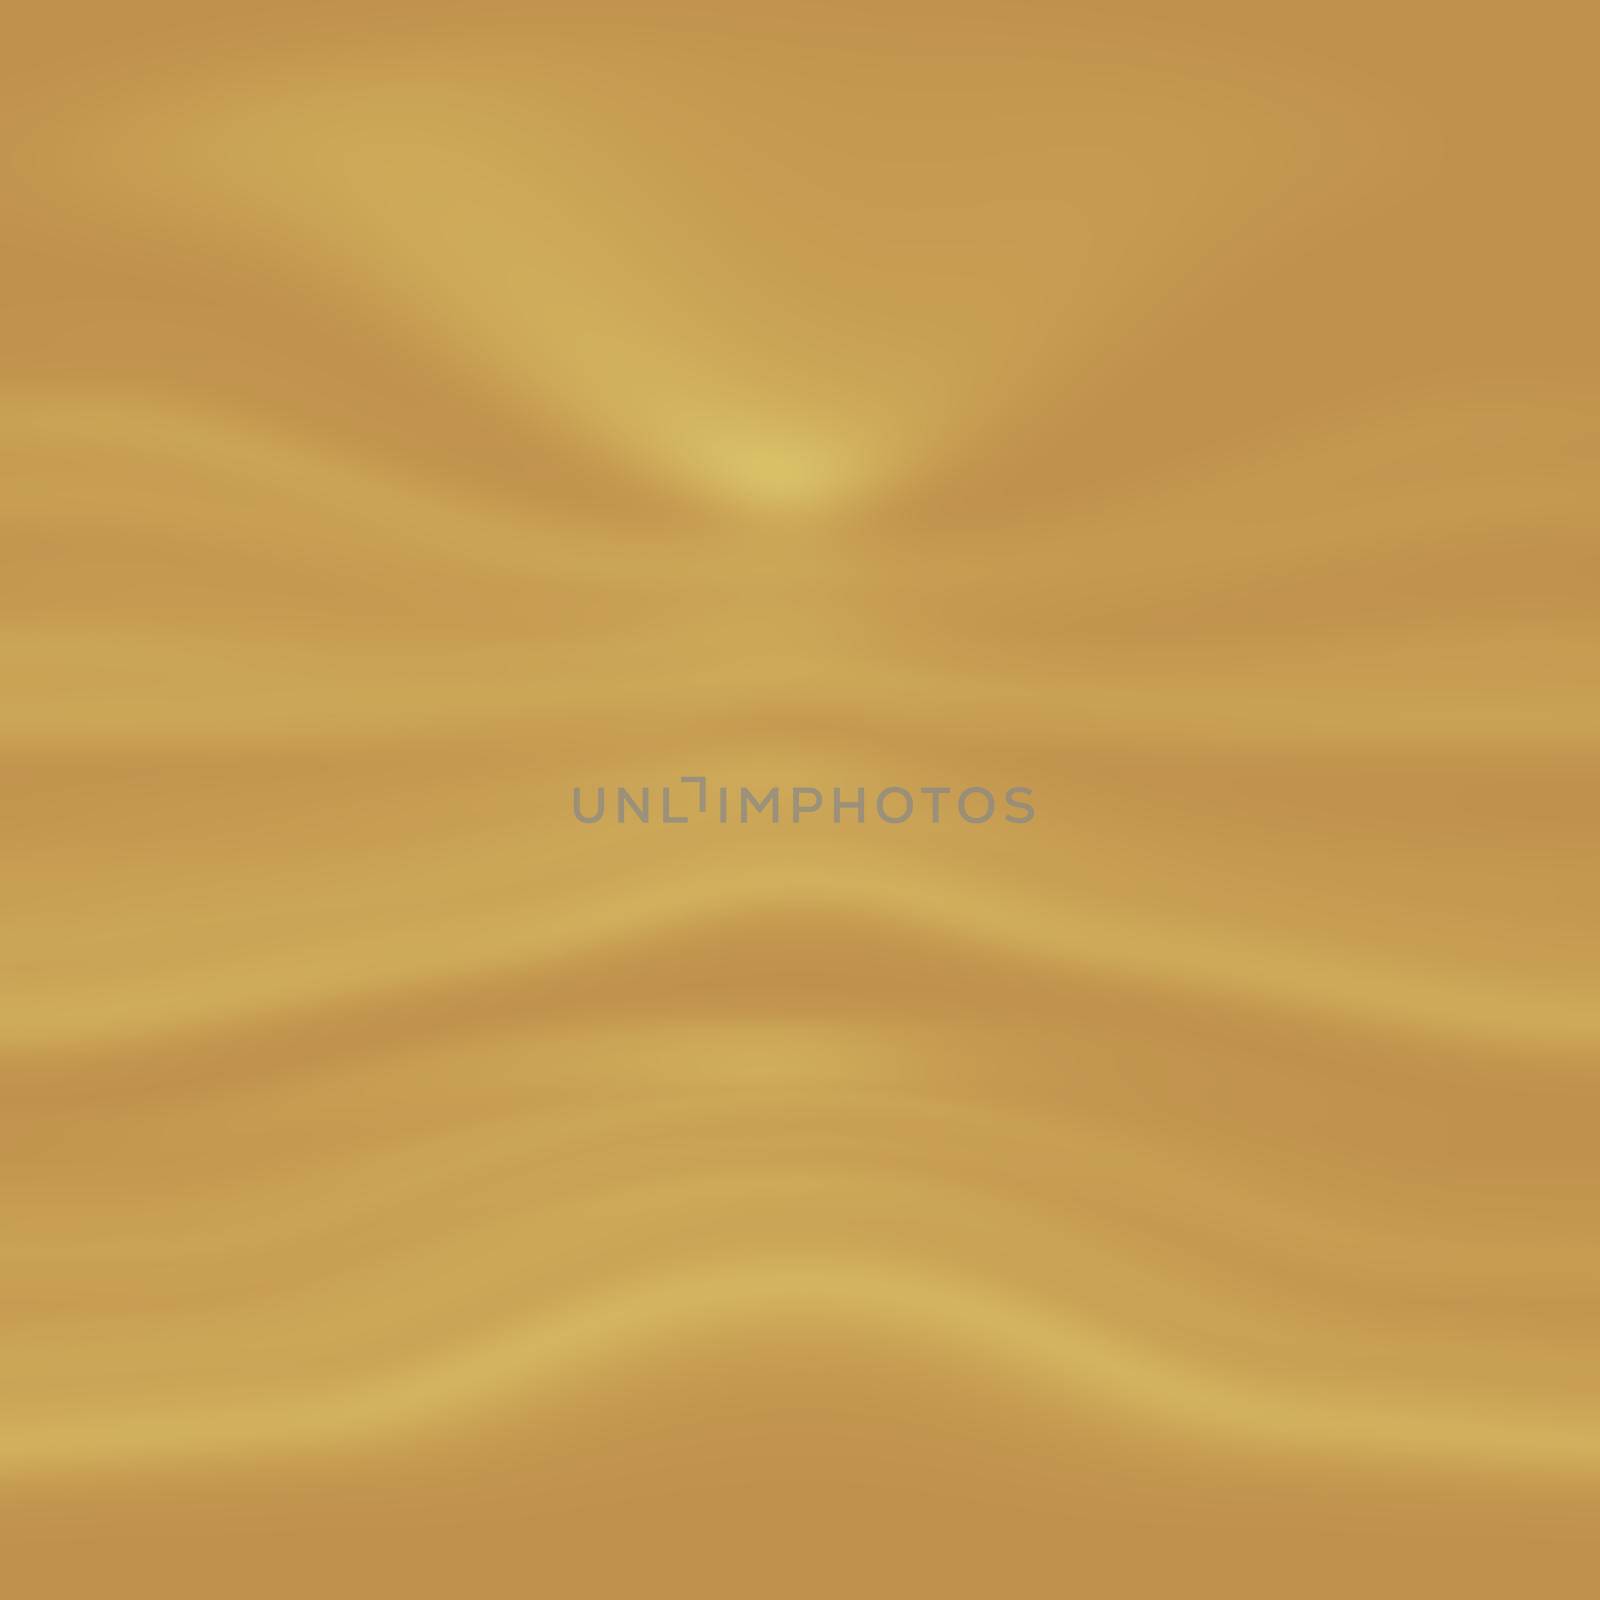 Luxury Gold shiny background with variating hues